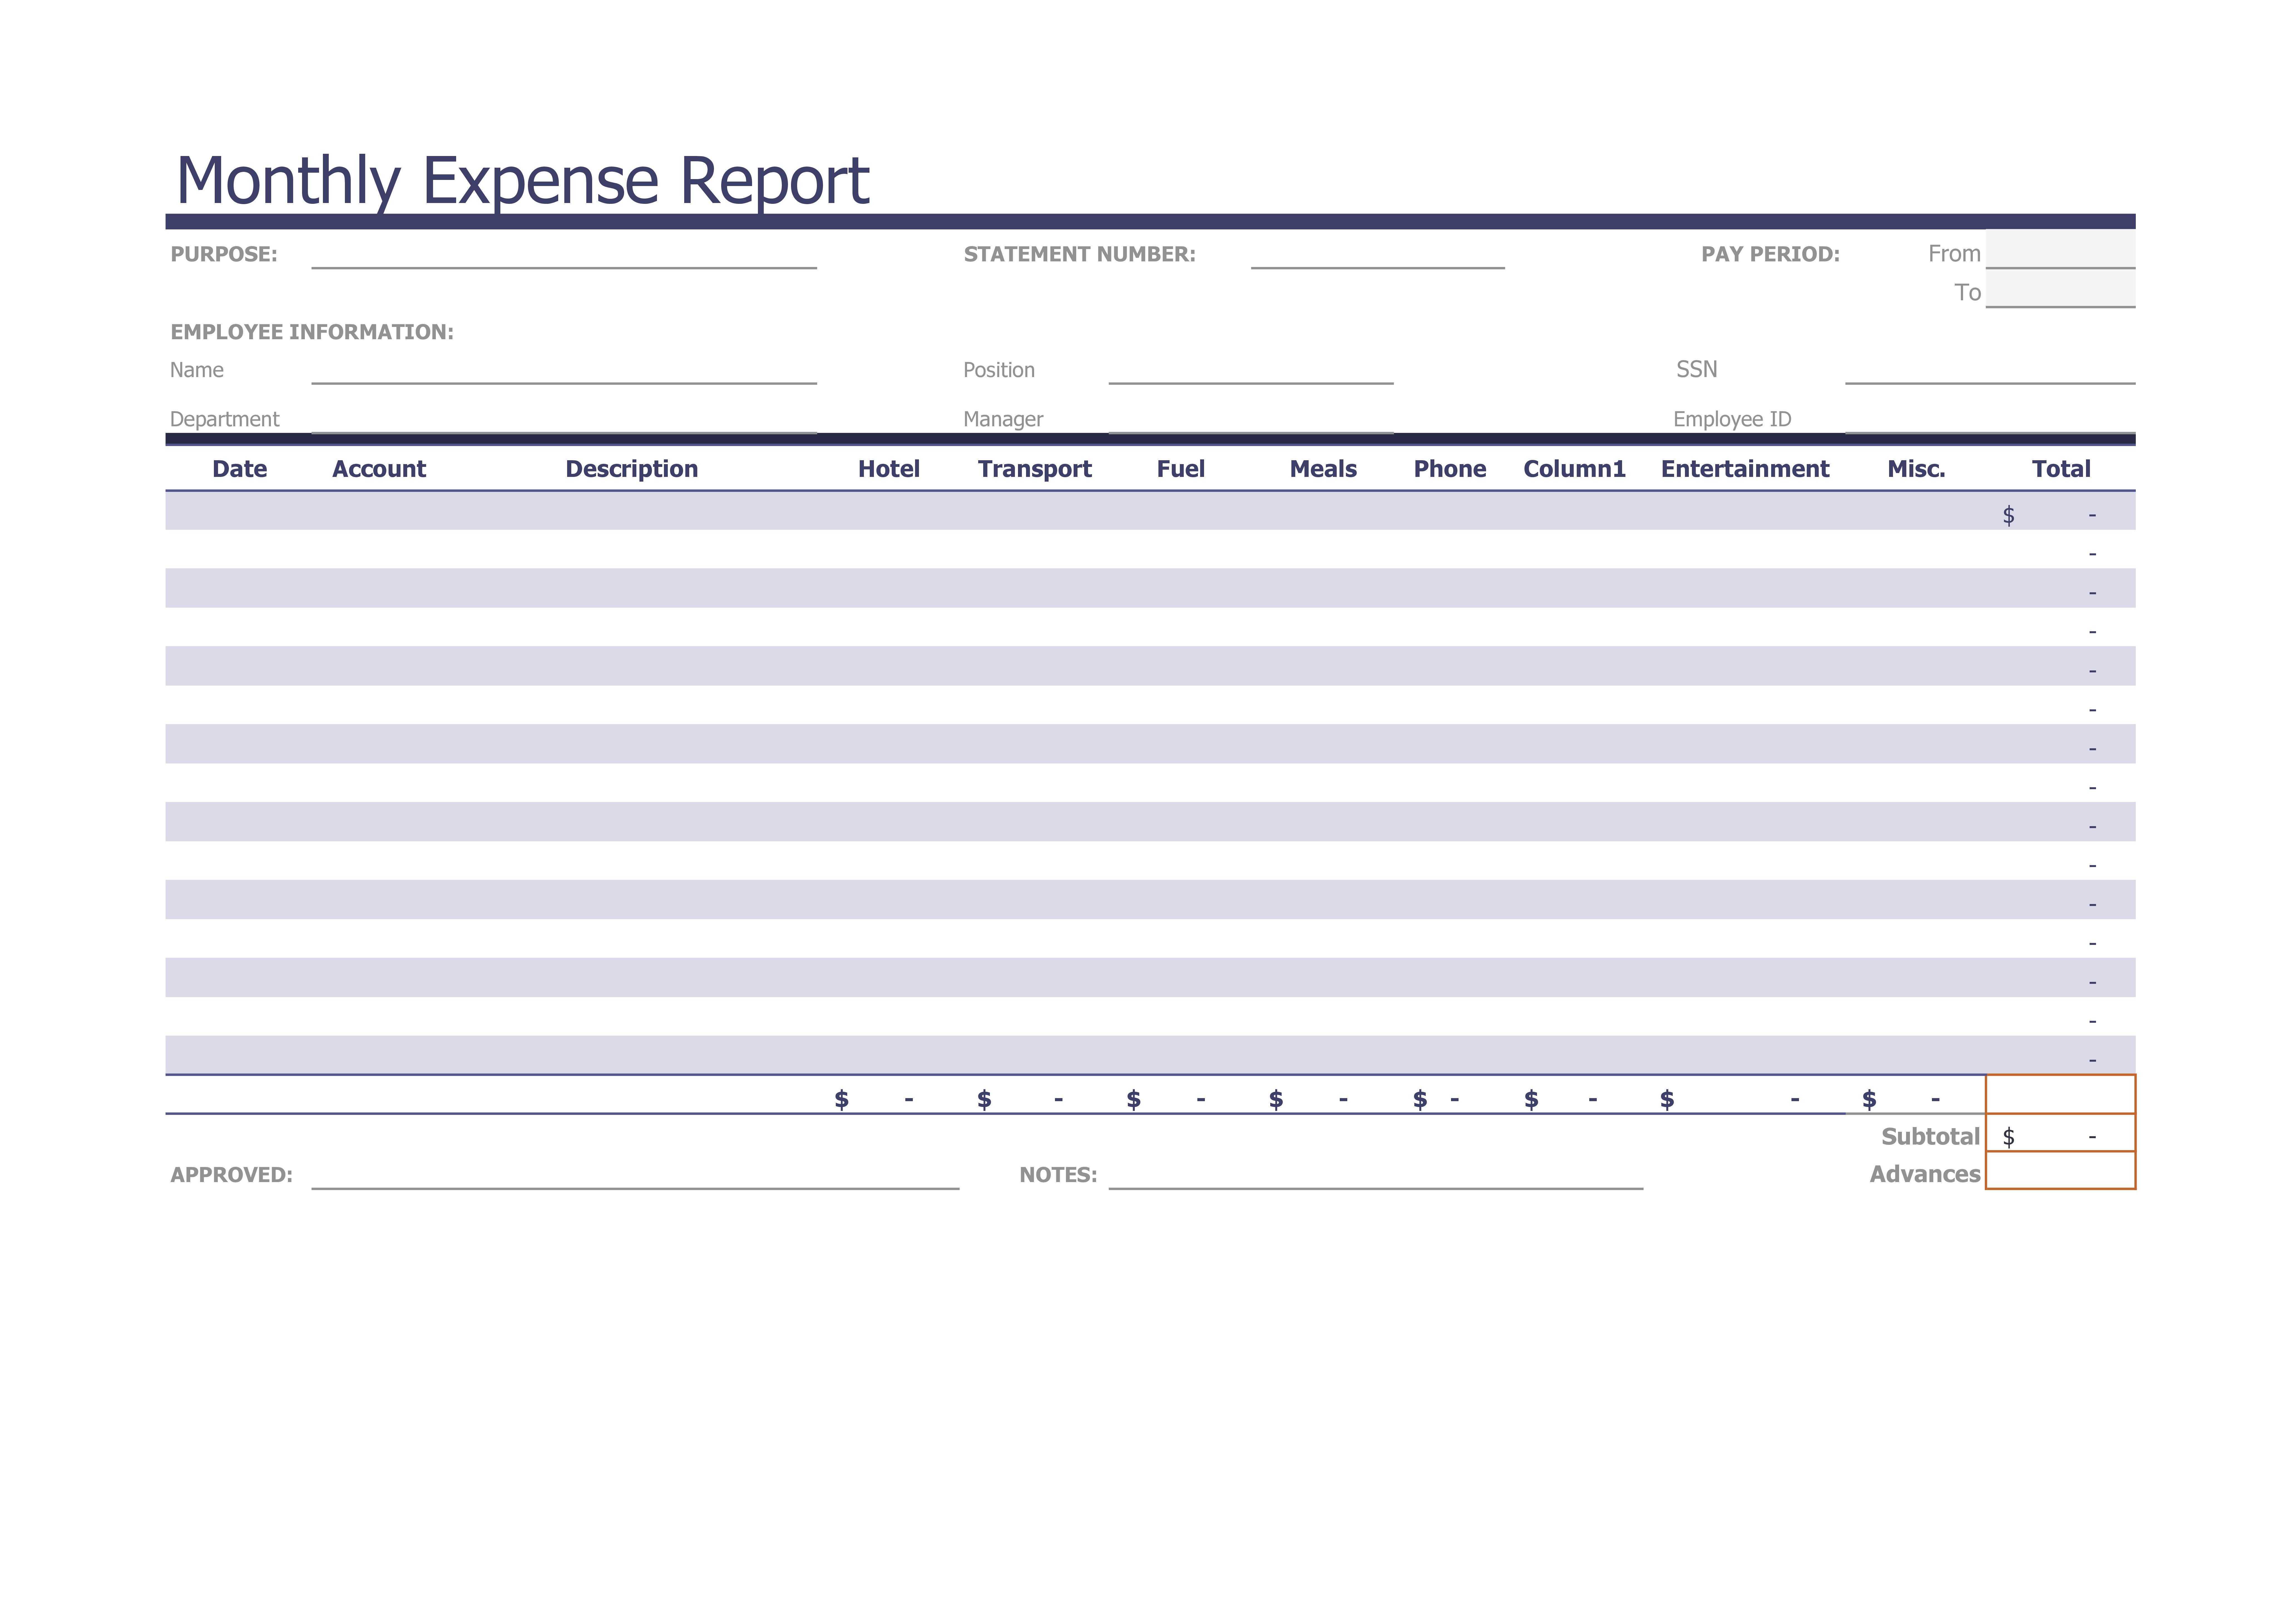 40+ Expense Report Templates To Help You Save Money ᐅ Regarding Monthly Expense Report Template Excel